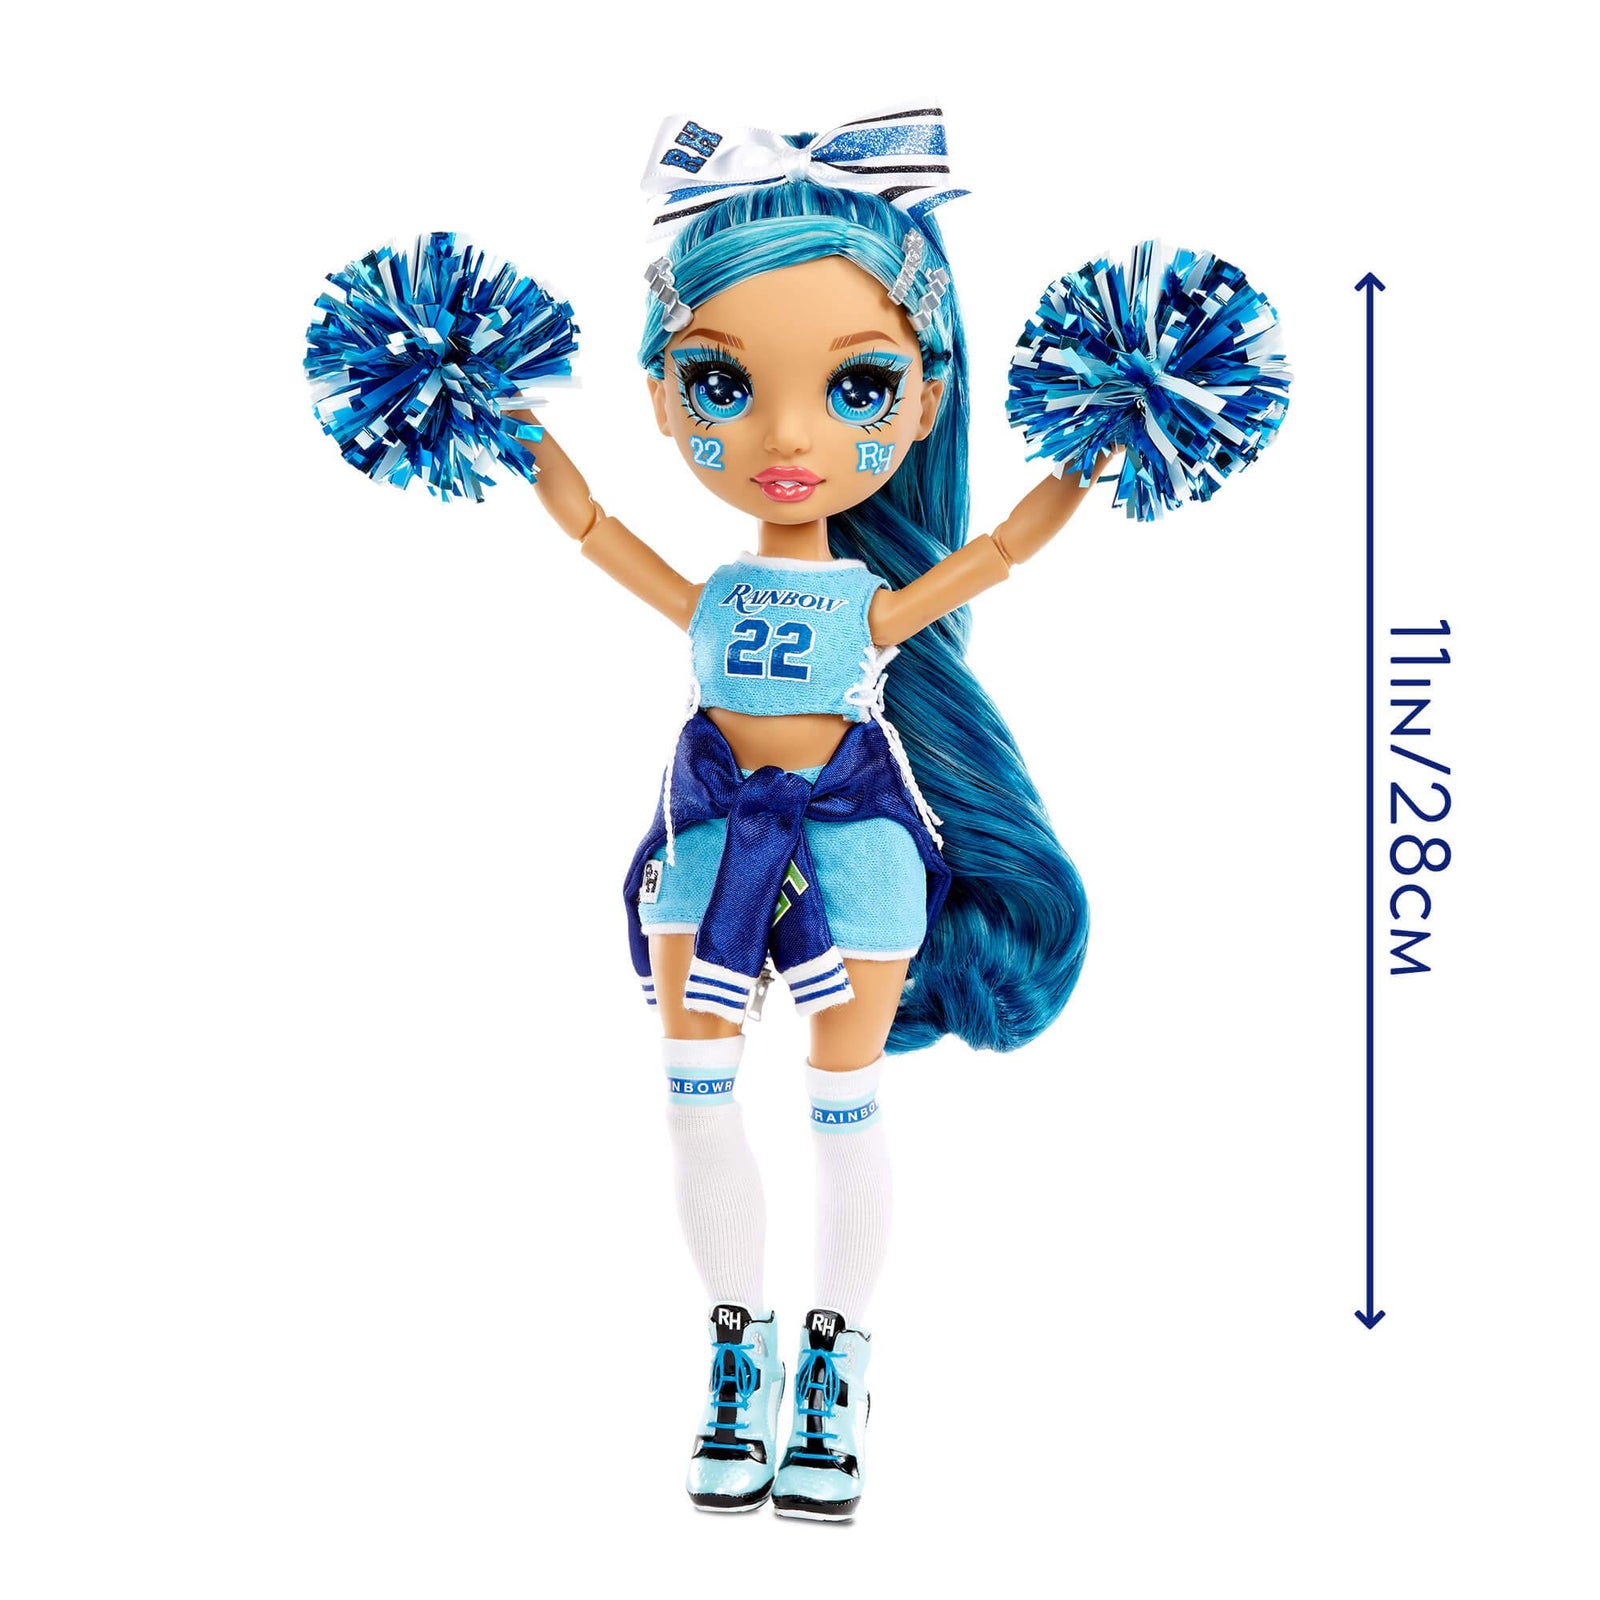 Rainbow High Cheer Skyler Bradshaw – Blue Cheerleader Fashion Doll with Pom Poms and Doll Accessories, Great for Kids 6-12 Years Old